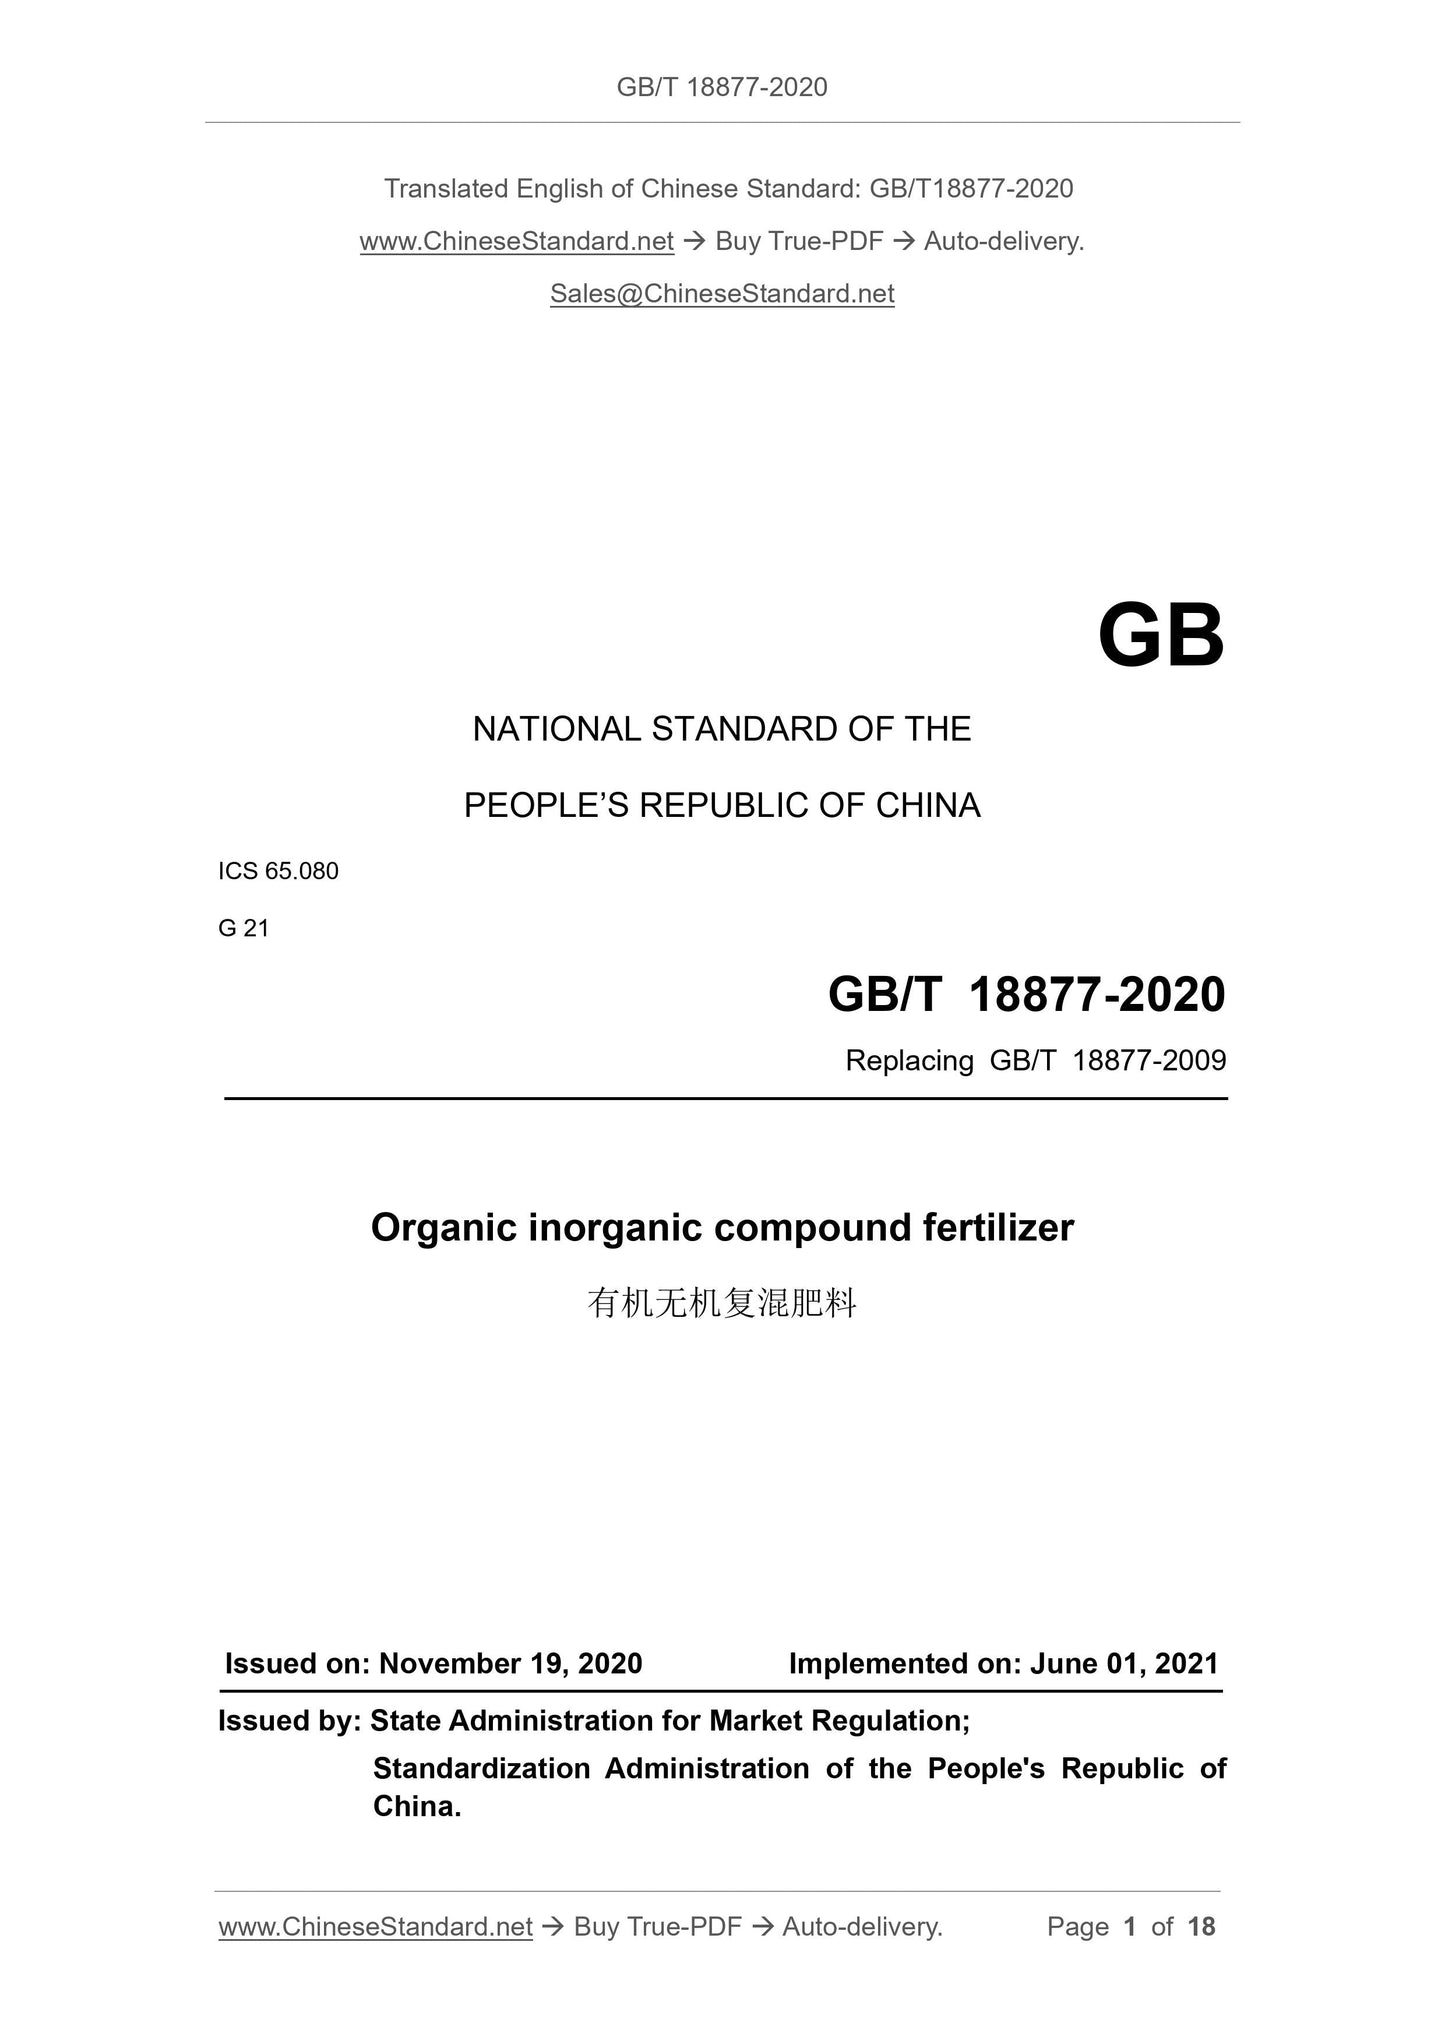 GB/T 18877-2020 Page 1